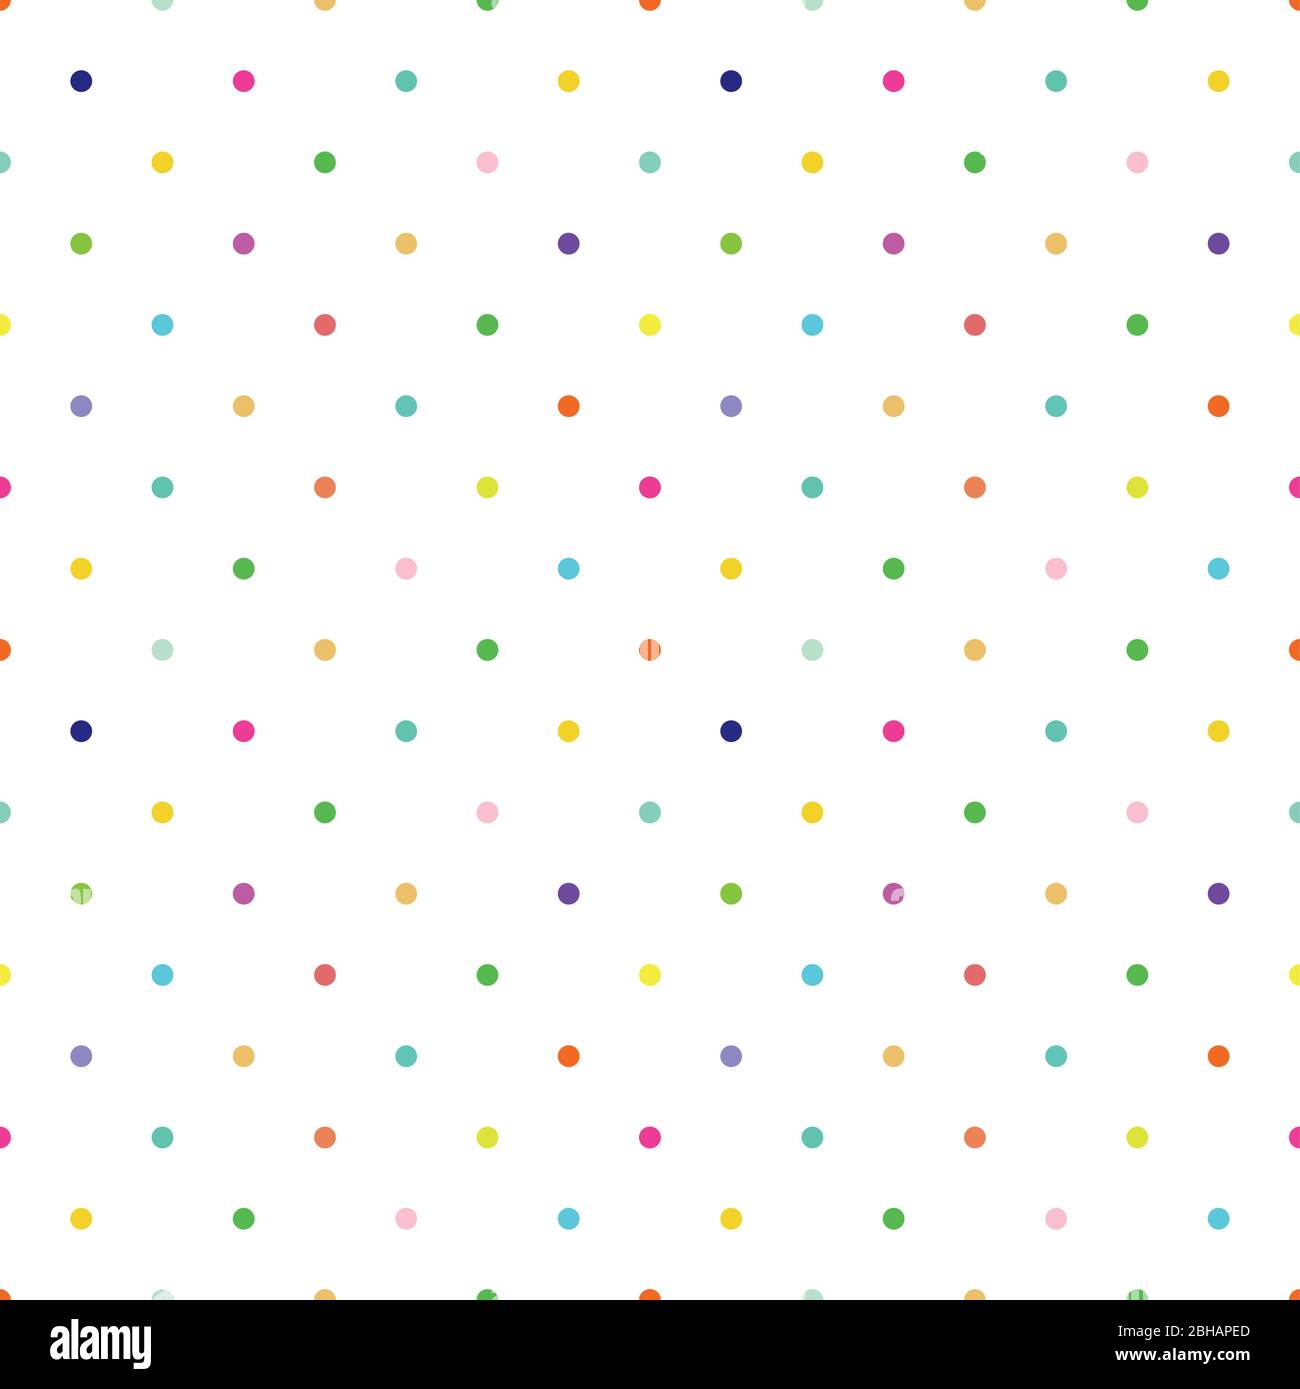 https://c8.alamy.com/comp/2BHAPED/ditsy-vector-polka-dot-seamless-pattern-background-small-circles-bright-multicolor-backdrop-regular-geometric-repeat-confetti-design-all-over-print-2BHAPED.jpg